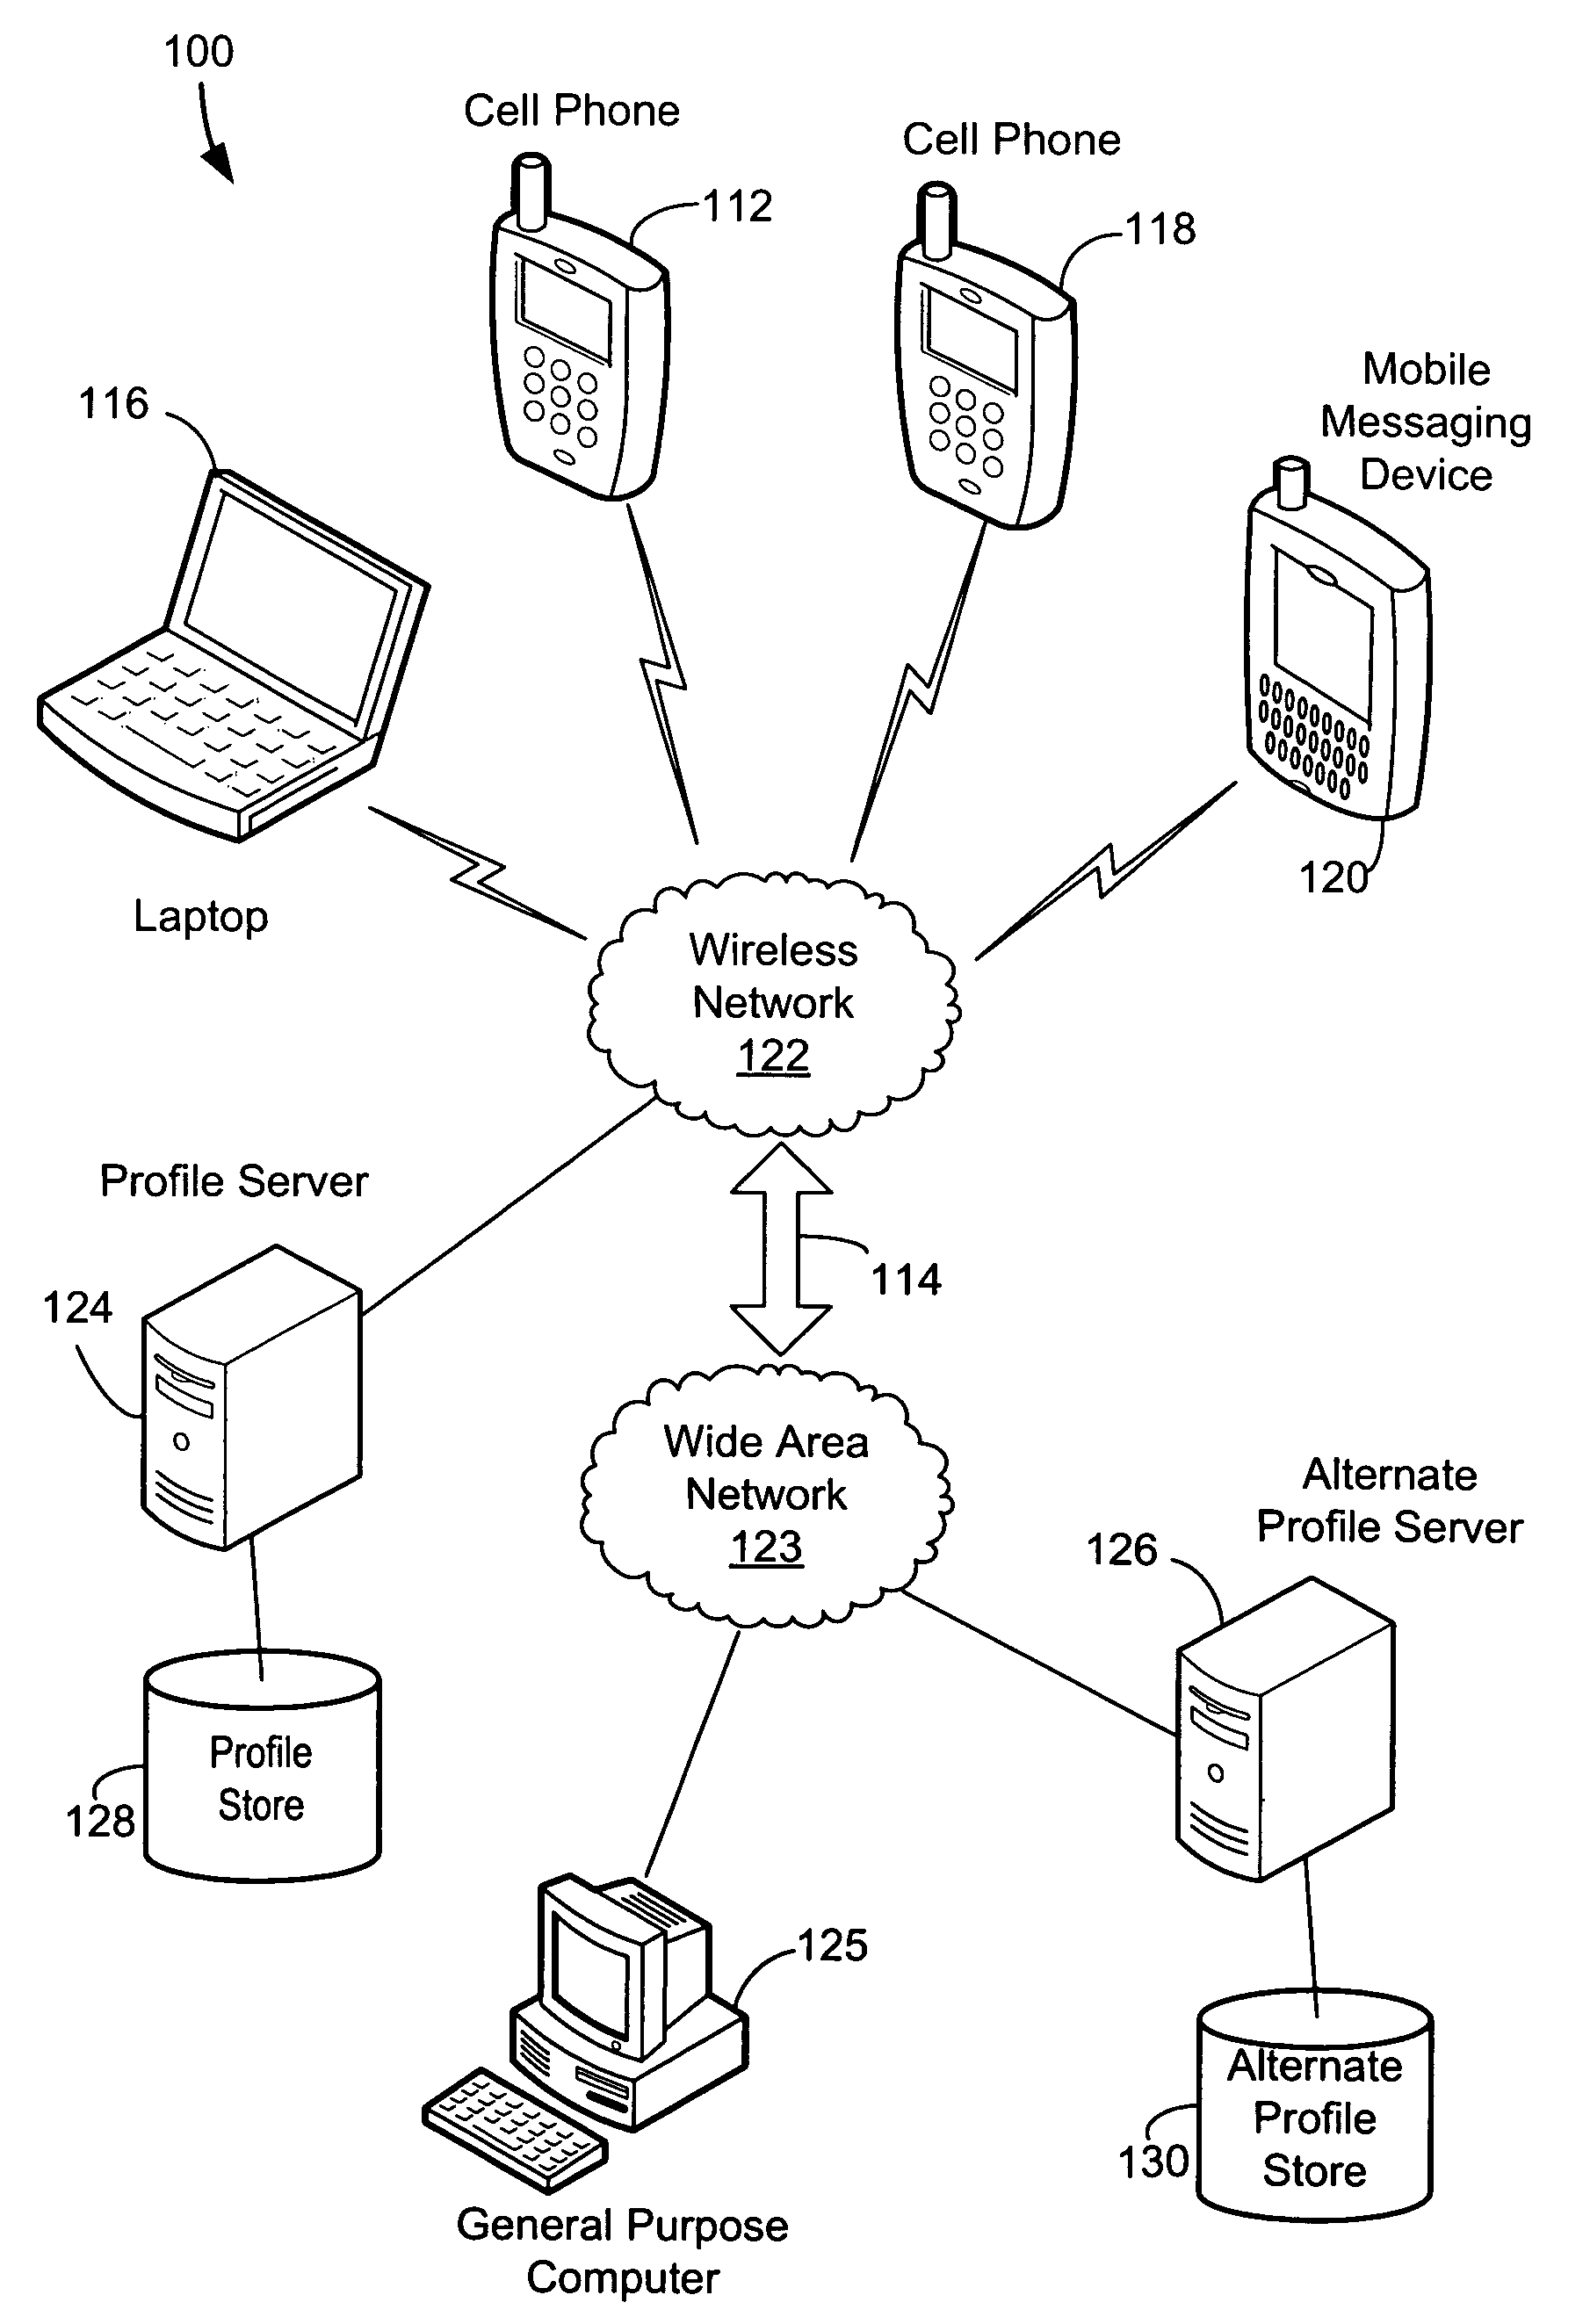 Sharing profile data between telecommunication devices